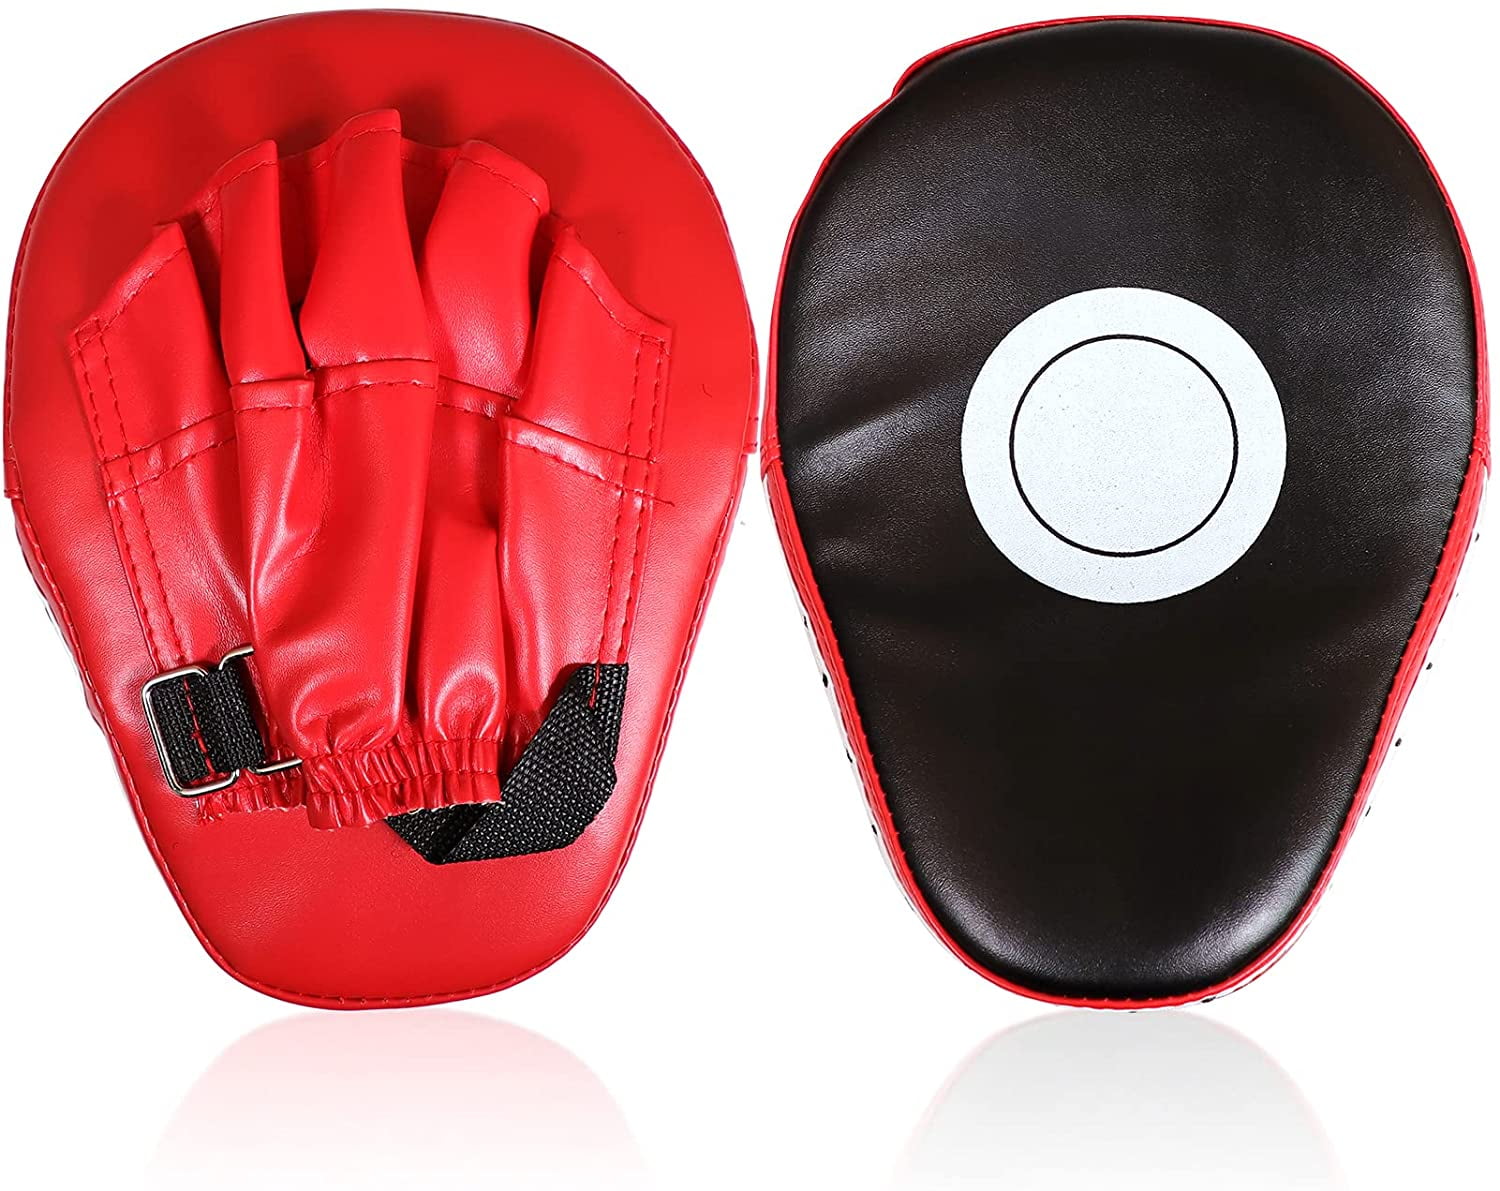 PAIR VENUM LIGHT FOCUS MITTS PUNCH AND KICK PADS BLACK OR WHITE 